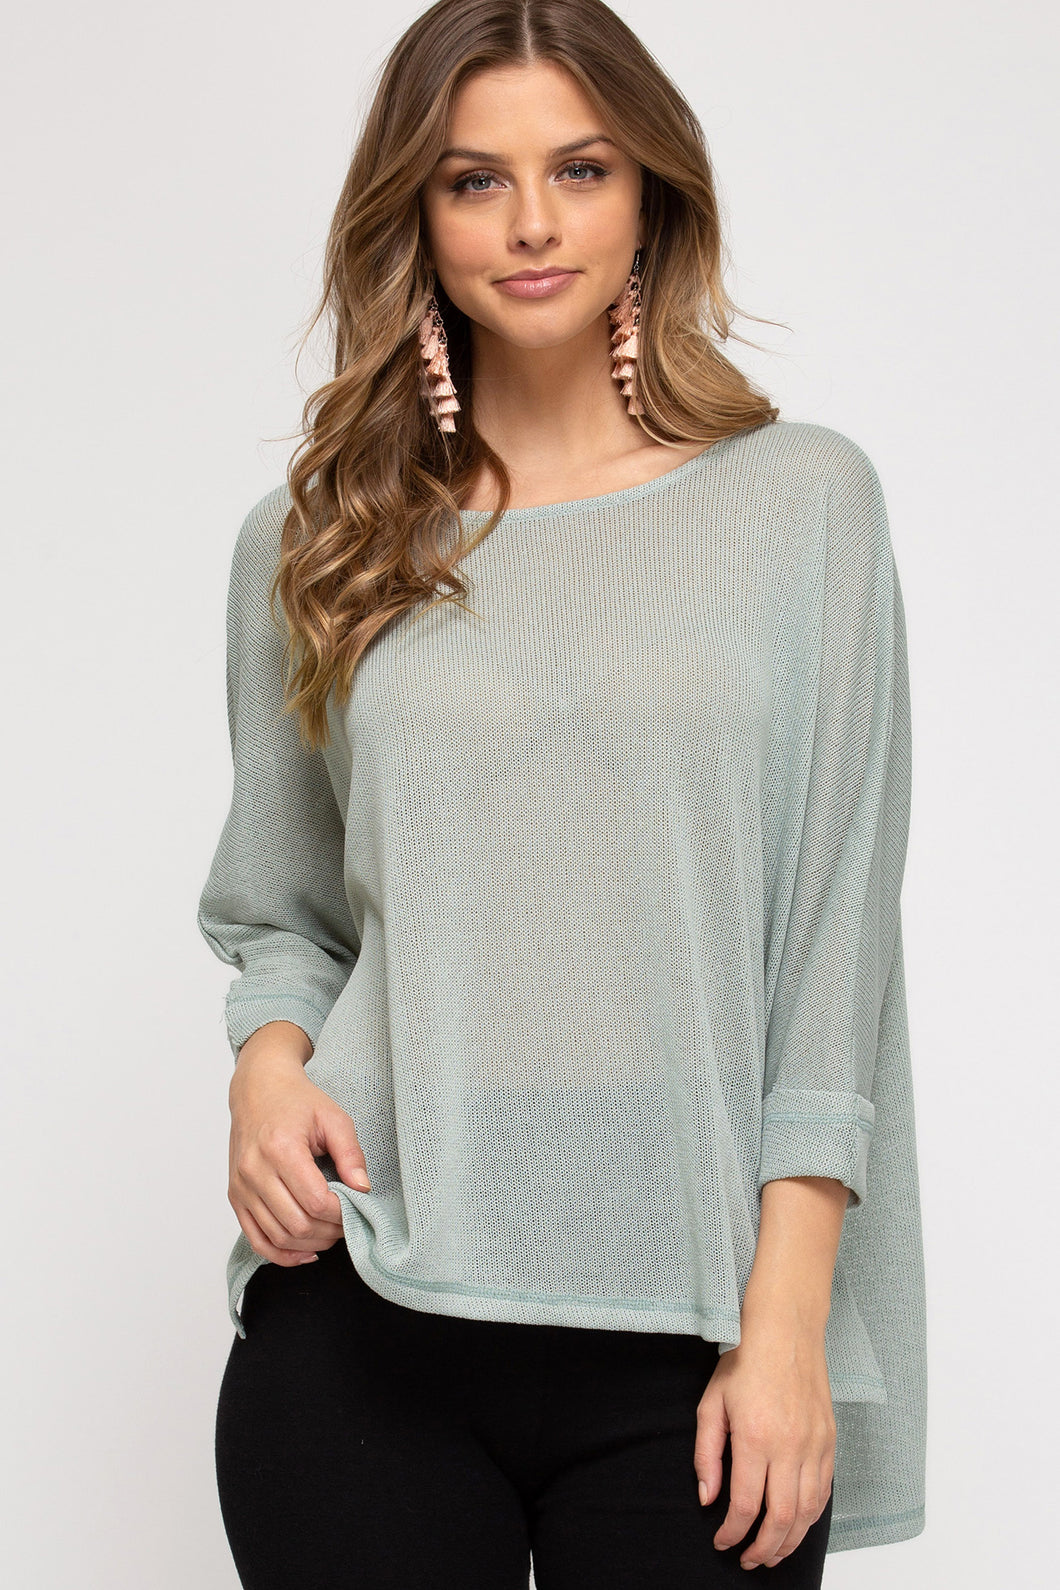 Batwing sleeve knit top